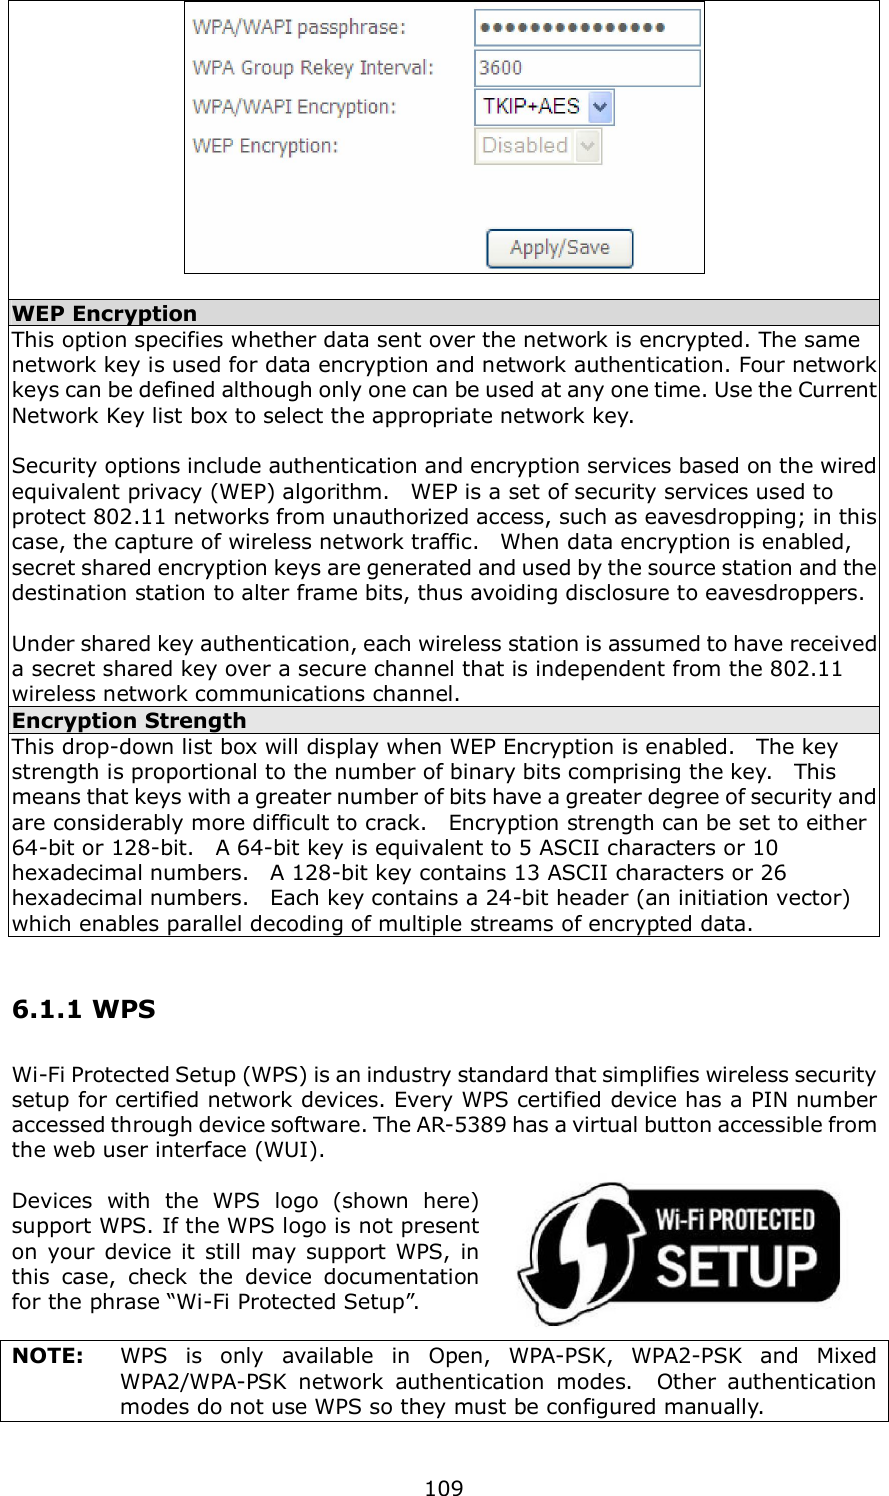  109   WEP Encryption This option specifies whether data sent over the network is encrypted. The same network key is used for data encryption and network authentication. Four network keys can be defined although only one can be used at any one time. Use the Current Network Key list box to select the appropriate network key.    Security options include authentication and encryption services based on the wired equivalent privacy (WEP) algorithm.    WEP is a set of security services used to protect 802.11 networks from unauthorized access, such as eavesdropping; in this case, the capture of wireless network traffic.    When data encryption is enabled, secret shared encryption keys are generated and used by the source station and the destination station to alter frame bits, thus avoiding disclosure to eavesdroppers.  Under shared key authentication, each wireless station is assumed to have received a secret shared key over a secure channel that is independent from the 802.11 wireless network communications channel. Encryption Strength This drop-down list box will display when WEP Encryption is enabled.    The key strength is proportional to the number of binary bits comprising the key.    This means that keys with a greater number of bits have a greater degree of security and are considerably more difficult to crack.   Encryption strength can be set to either 64-bit or 128-bit.    A 64-bit key is equivalent to 5 ASCII characters or 10 hexadecimal numbers.    A 128-bit key contains 13 ASCII characters or 26 hexadecimal numbers.    Each key contains a 24-bit header (an initiation vector) which enables parallel decoding of multiple streams of encrypted data. 6.1.1 WPS Wi-Fi Protected Setup (WPS) is an industry standard that simplifies wireless security setup for certified network devices. Every WPS certified device has a PIN number accessed through device software. The AR-5389 has a virtual button accessible from the web user interface (WUI).  Devices  with  the  WPS  logo  (shown  here) support WPS. If the WPS logo is not present on  your  device it still may support  WPS, in this  case,  check  the  device  documentation for the phrase “Wi-Fi Protected Setup”.  NOTE:  WPS  is  only  available  in  Open,  WPA-PSK,  WPA2-PSK  and  Mixed WPA2/WPA-PSK  network  authentication  modes.    Other  authentication modes do not use WPS so they must be configured manually.  